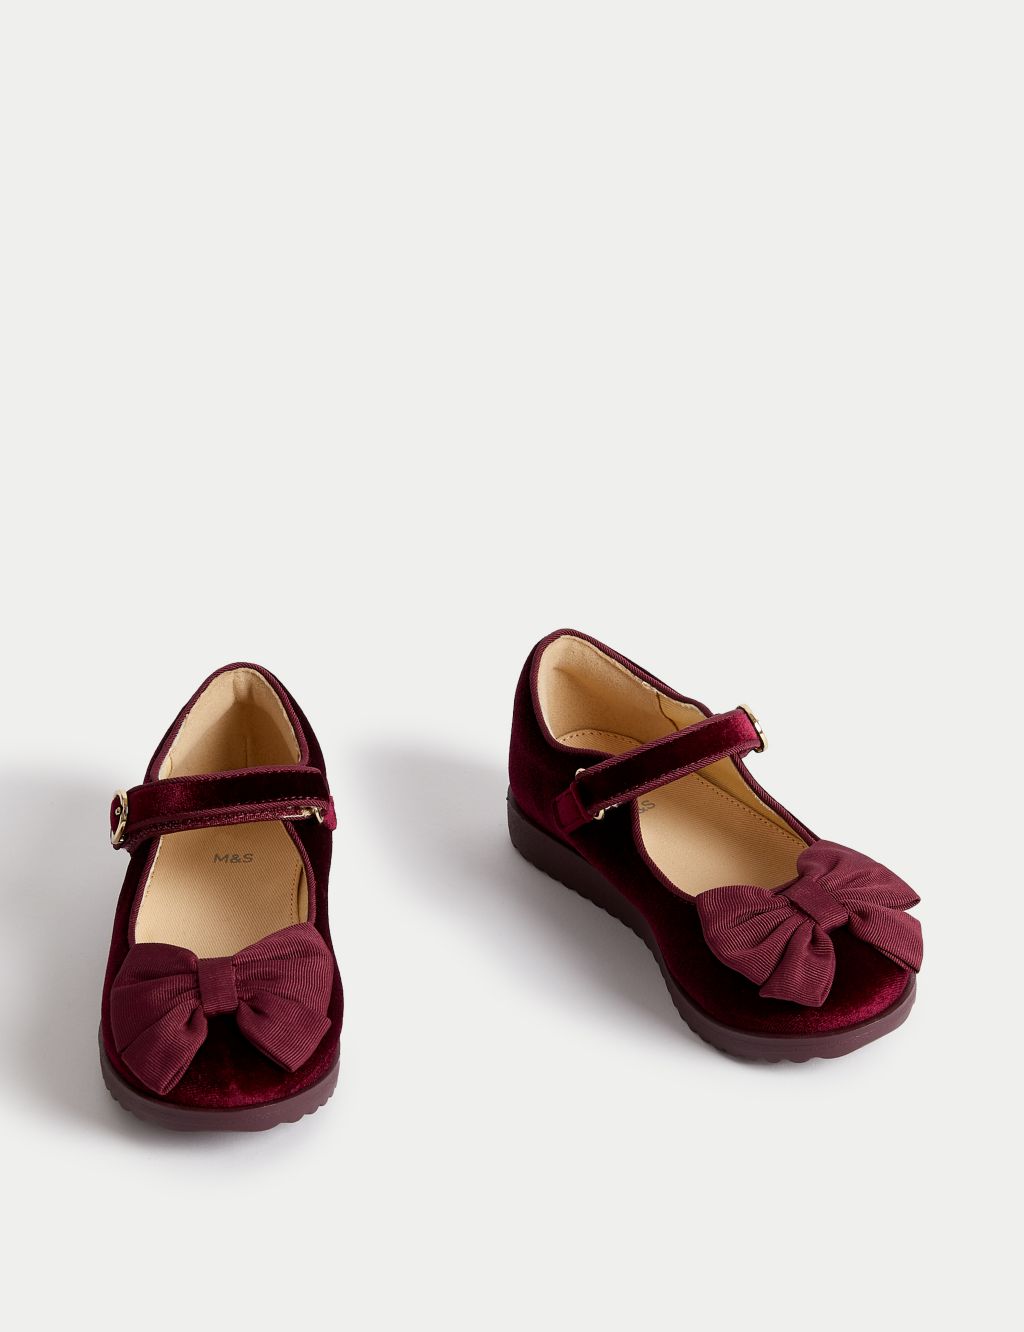 Kids' Bow Mary Jane Shoes (4 Small - 13 Small) image 2